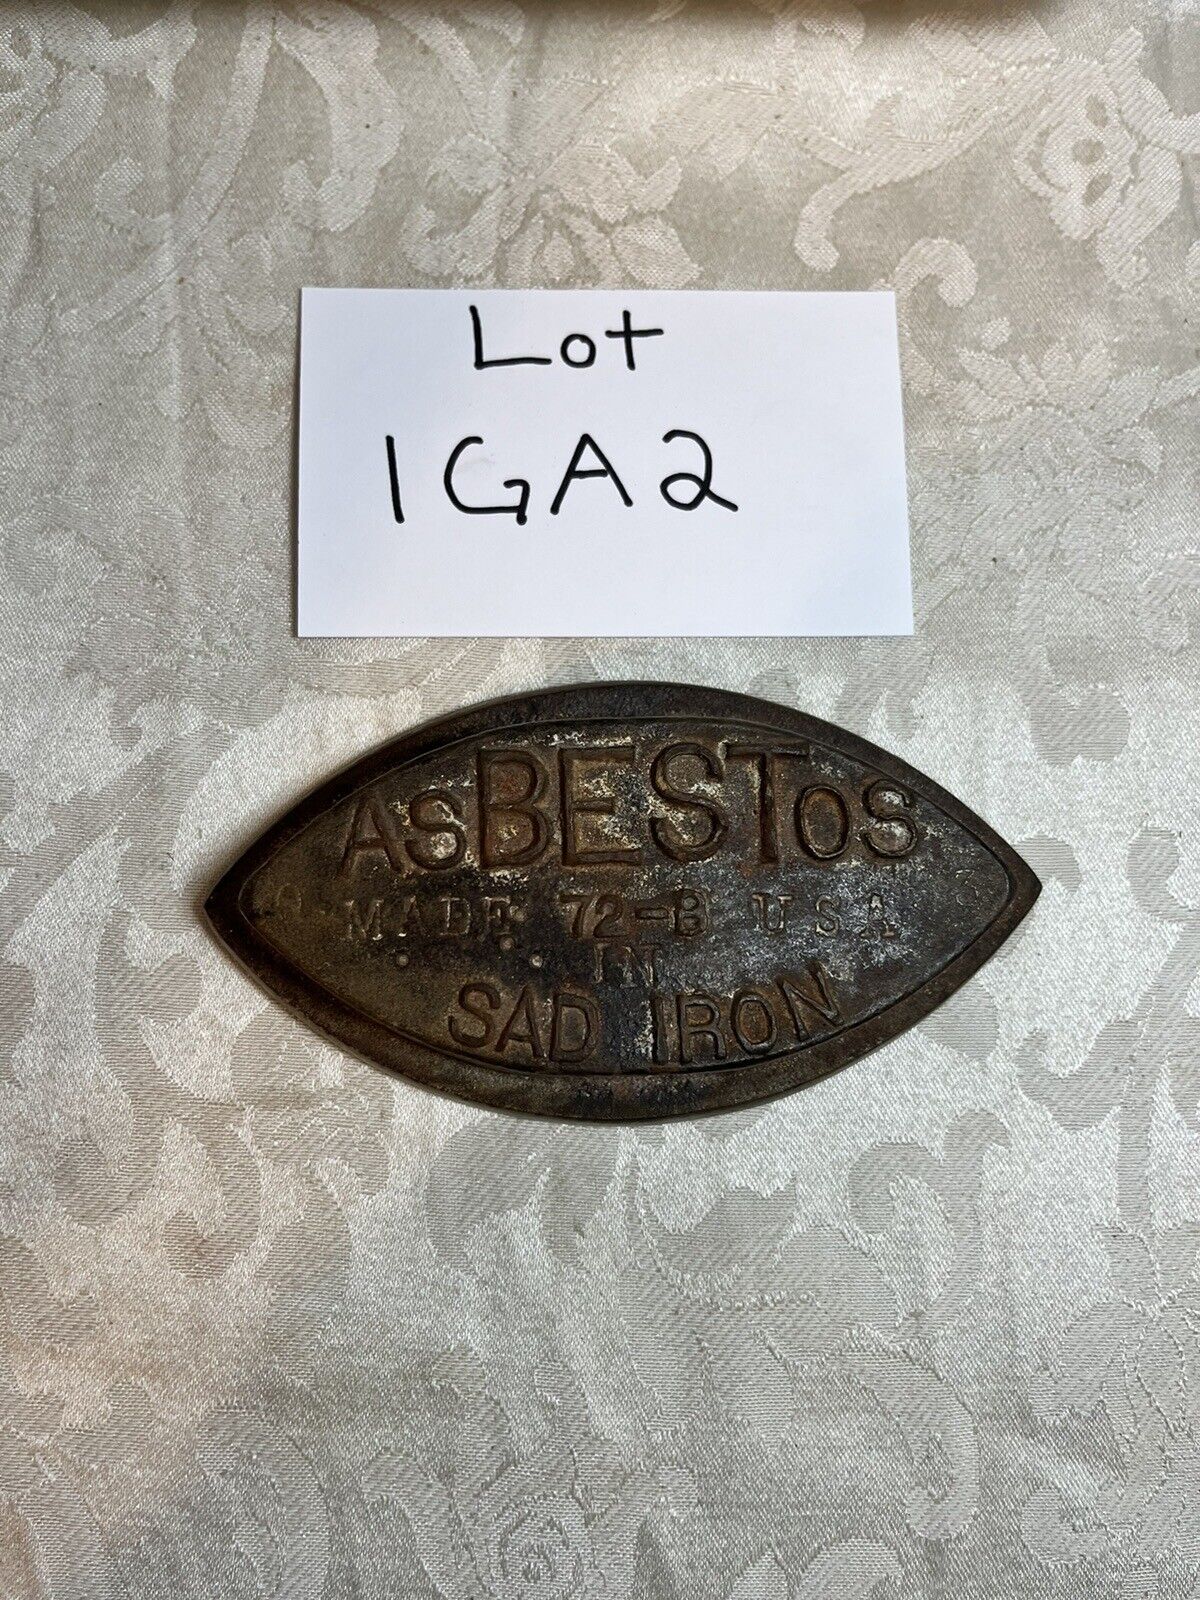 Asbestos 72 A Sad Iron Cast Iron Rusty Door Stop Laundry Sewing Room Collectible